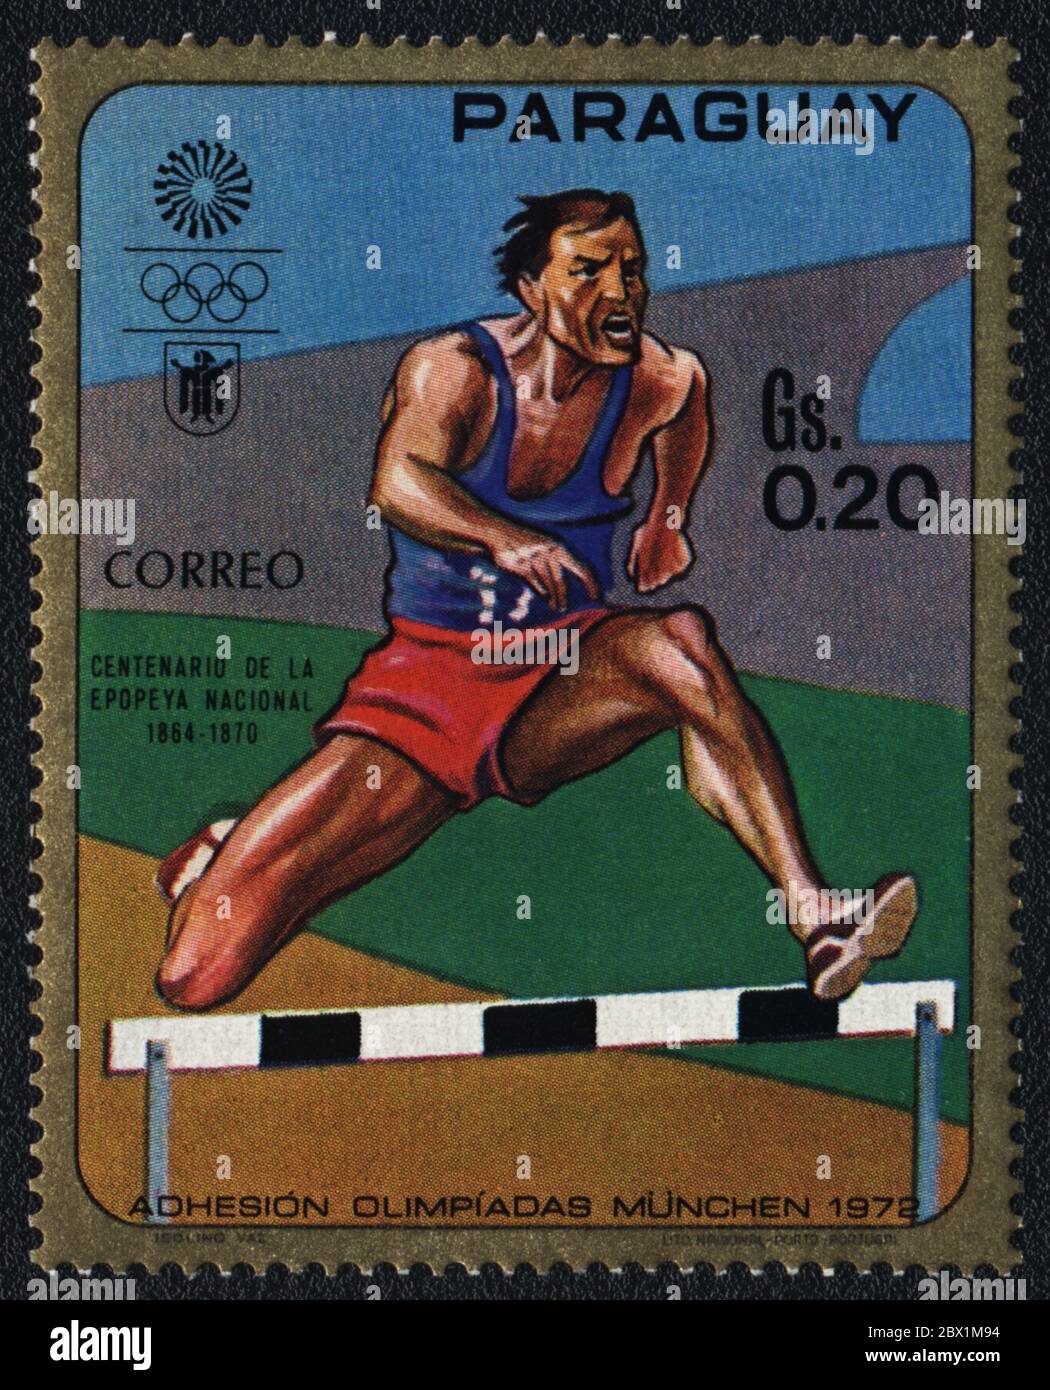 Running hurdles. Summer Olympics Games in Munich 1972. Series: Centenary of the National Epic 1864 - 1870. Postal stamp:  Paraguay, 1972 Stock Photo